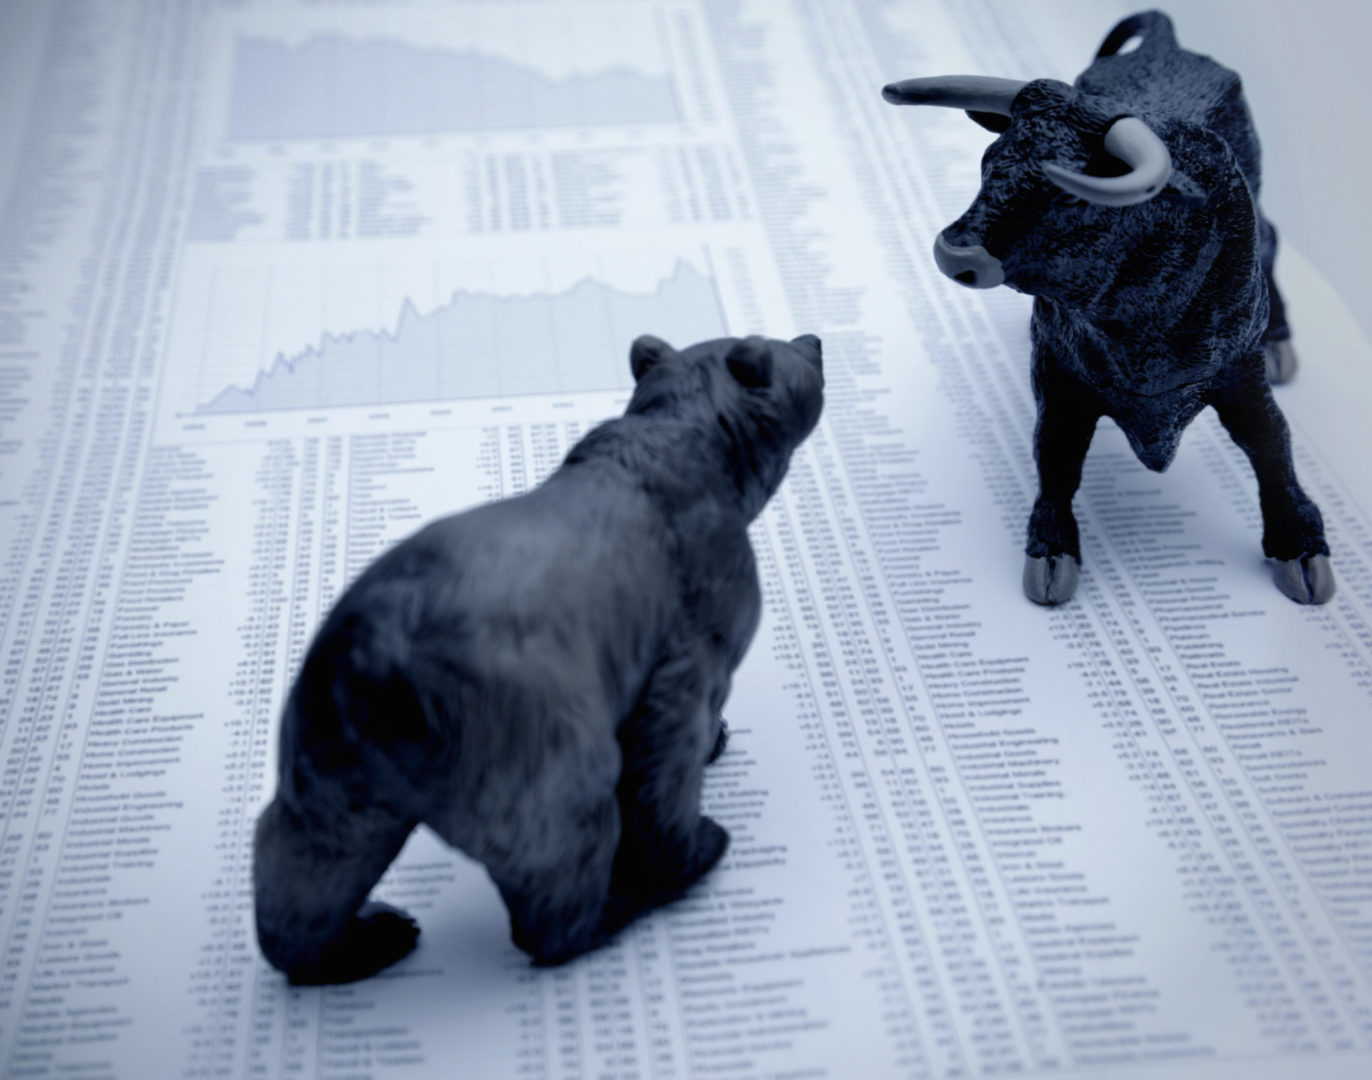 the bulls and the bears result from investment risks and volatility in financial markets